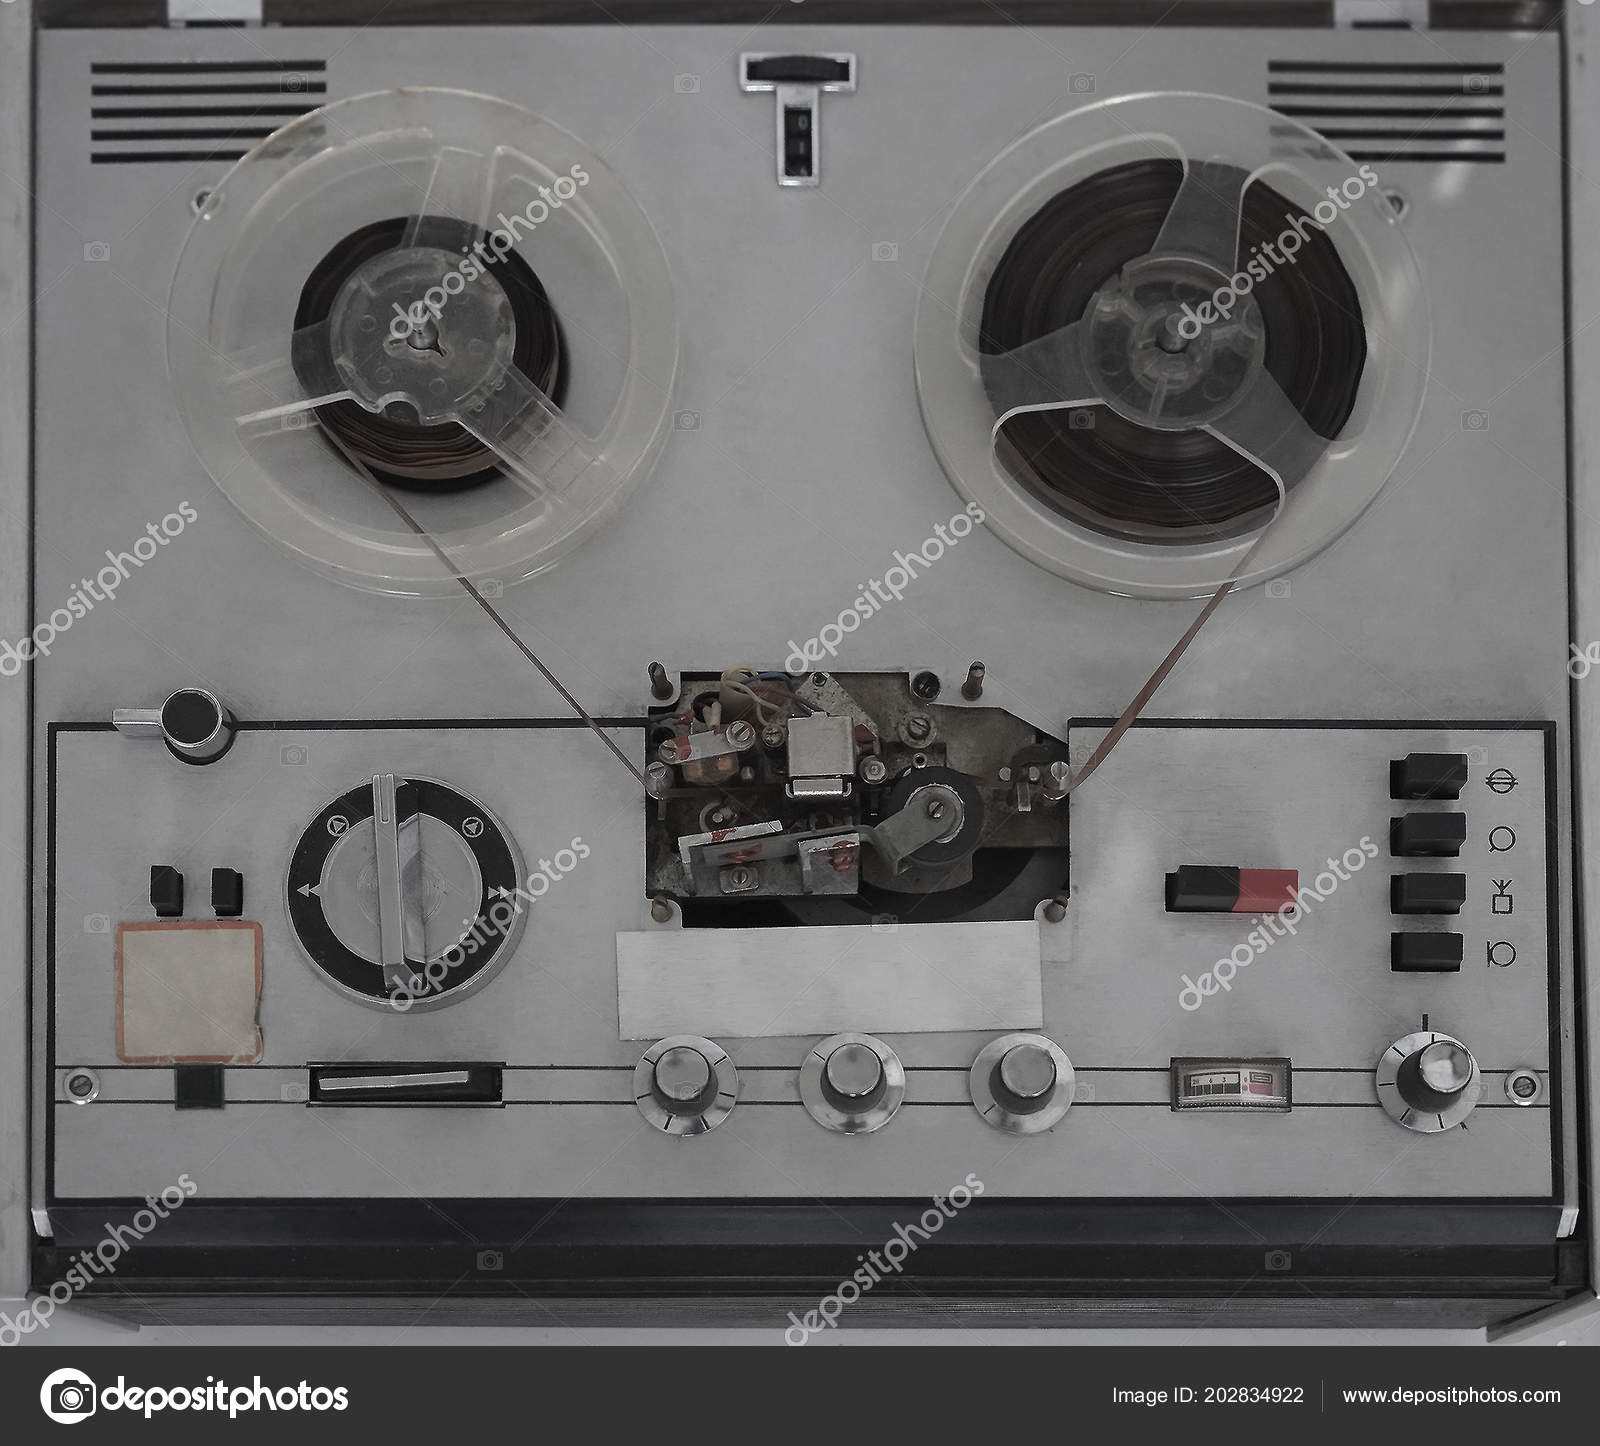 Old Reel Tape Recorder Wooden Table Retro Style Stock Photo by